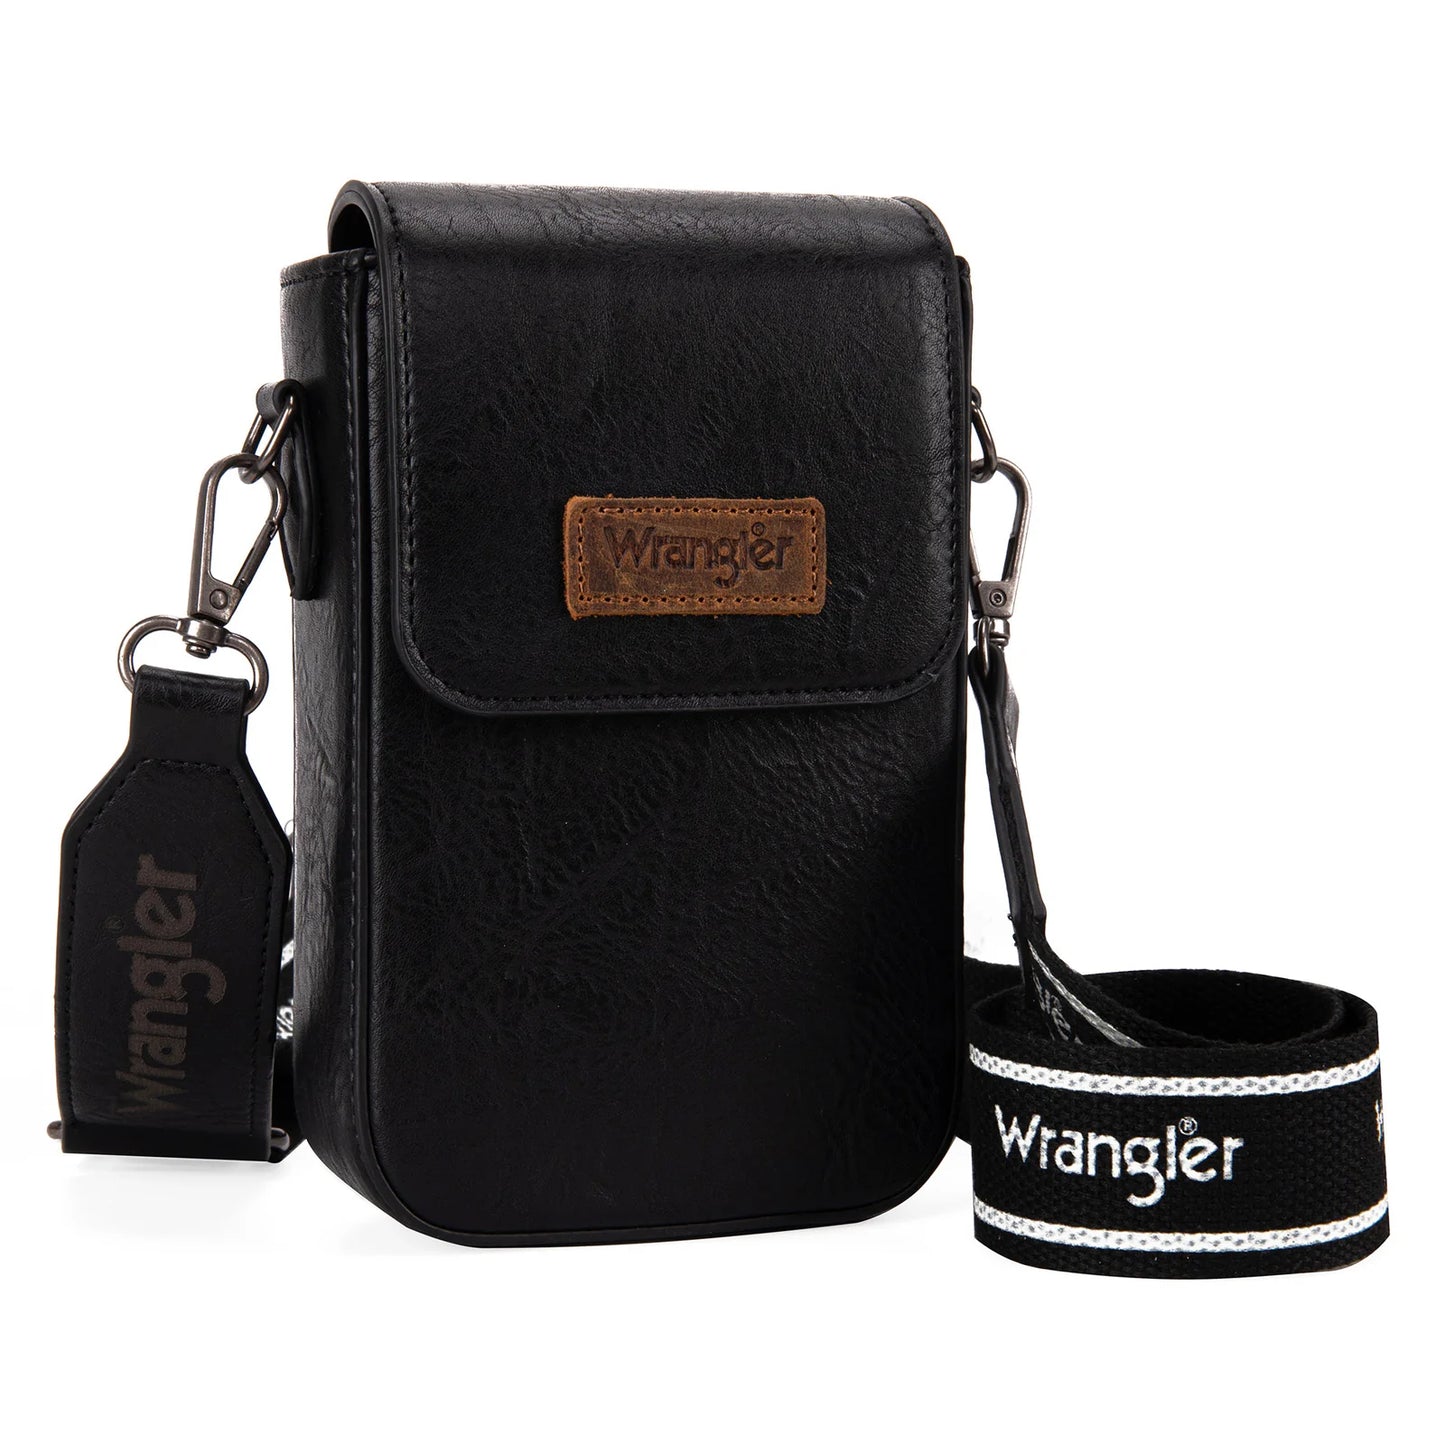 Wrangler Crossbody Cell Phone Purse With Back Card Slots - Black